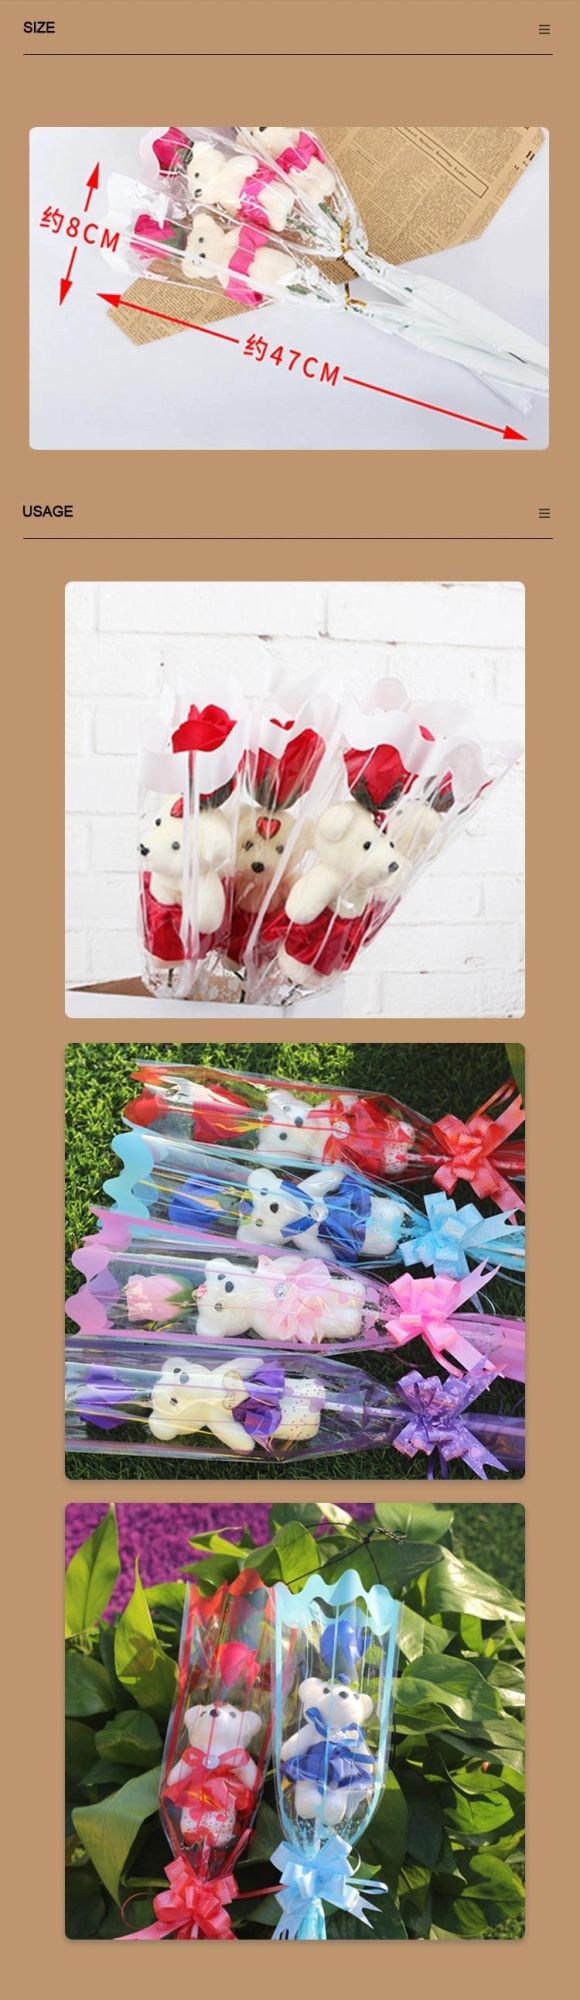 Hotsale Single Soap Rose Flower with Teddy Bear Valentine′ S Day, Mother′ S Day, Christmas